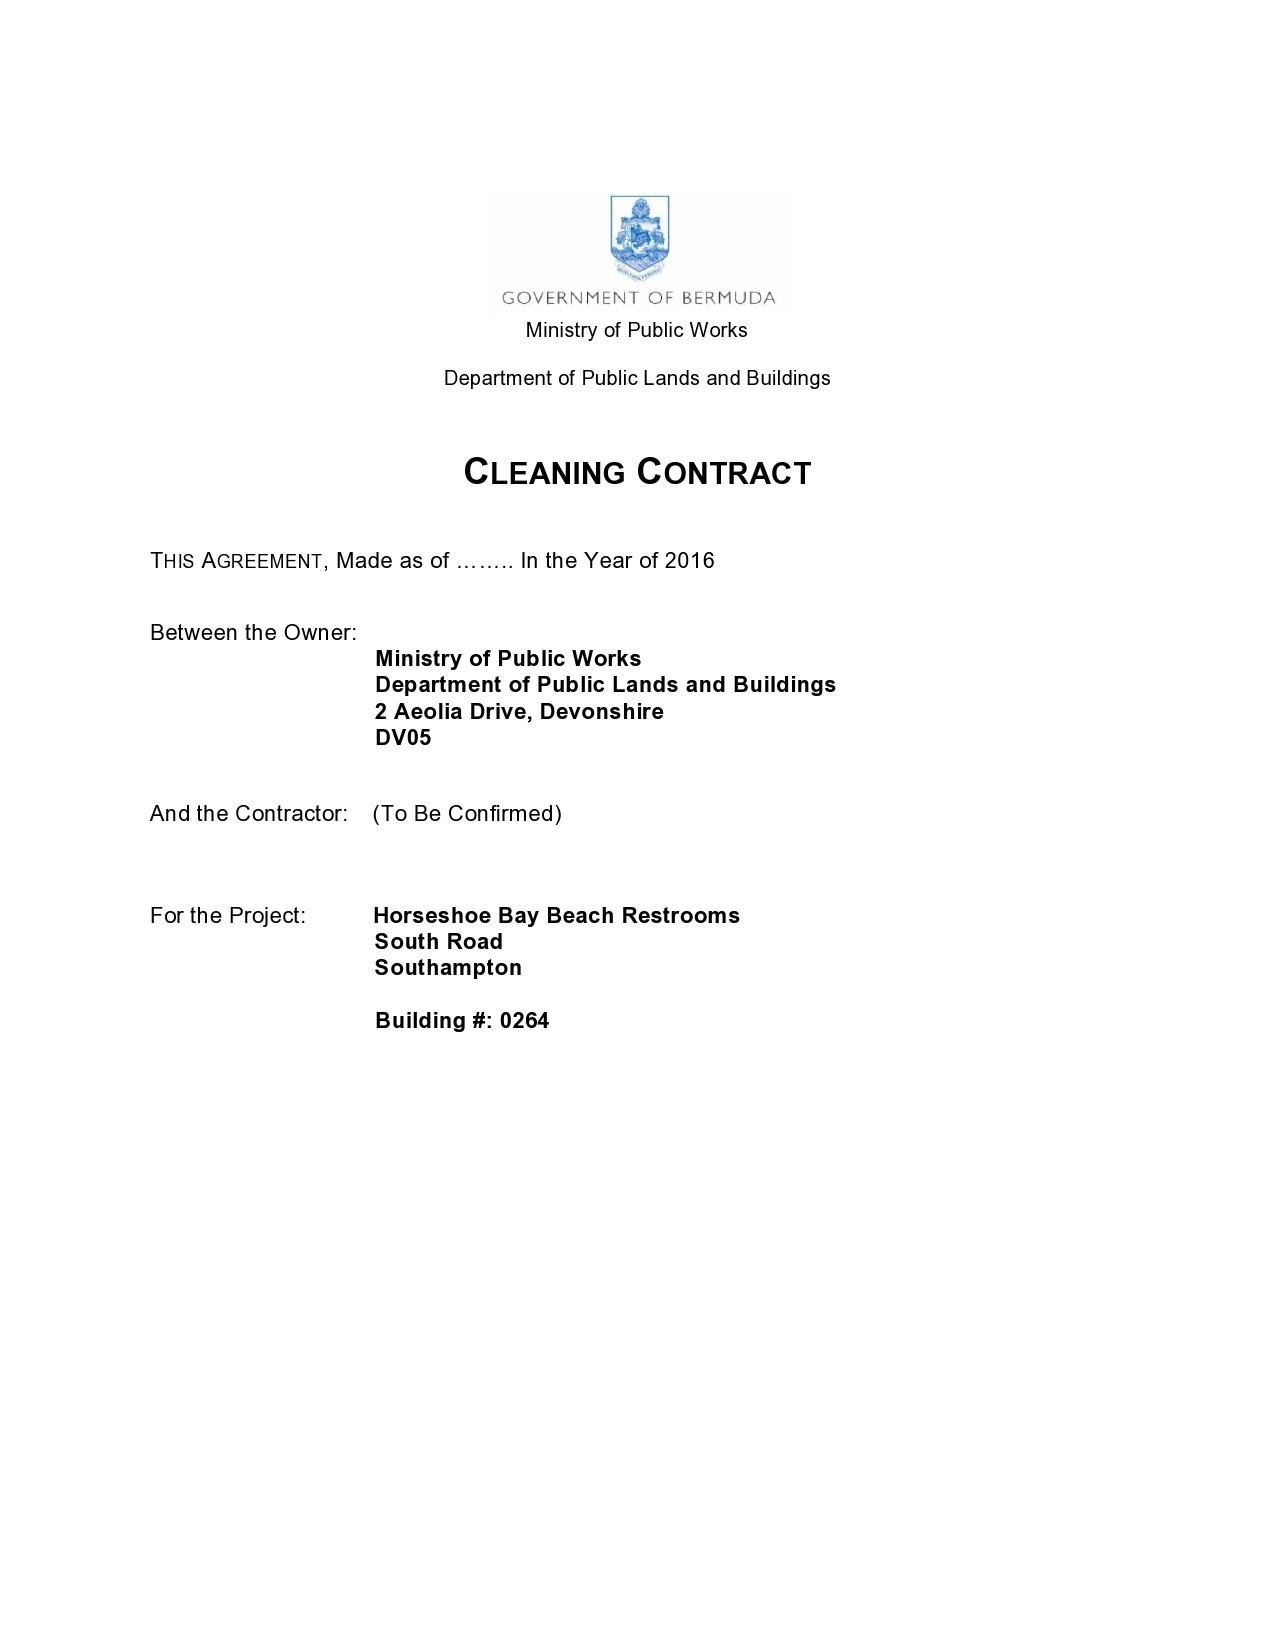 Free cleaning contract template 17